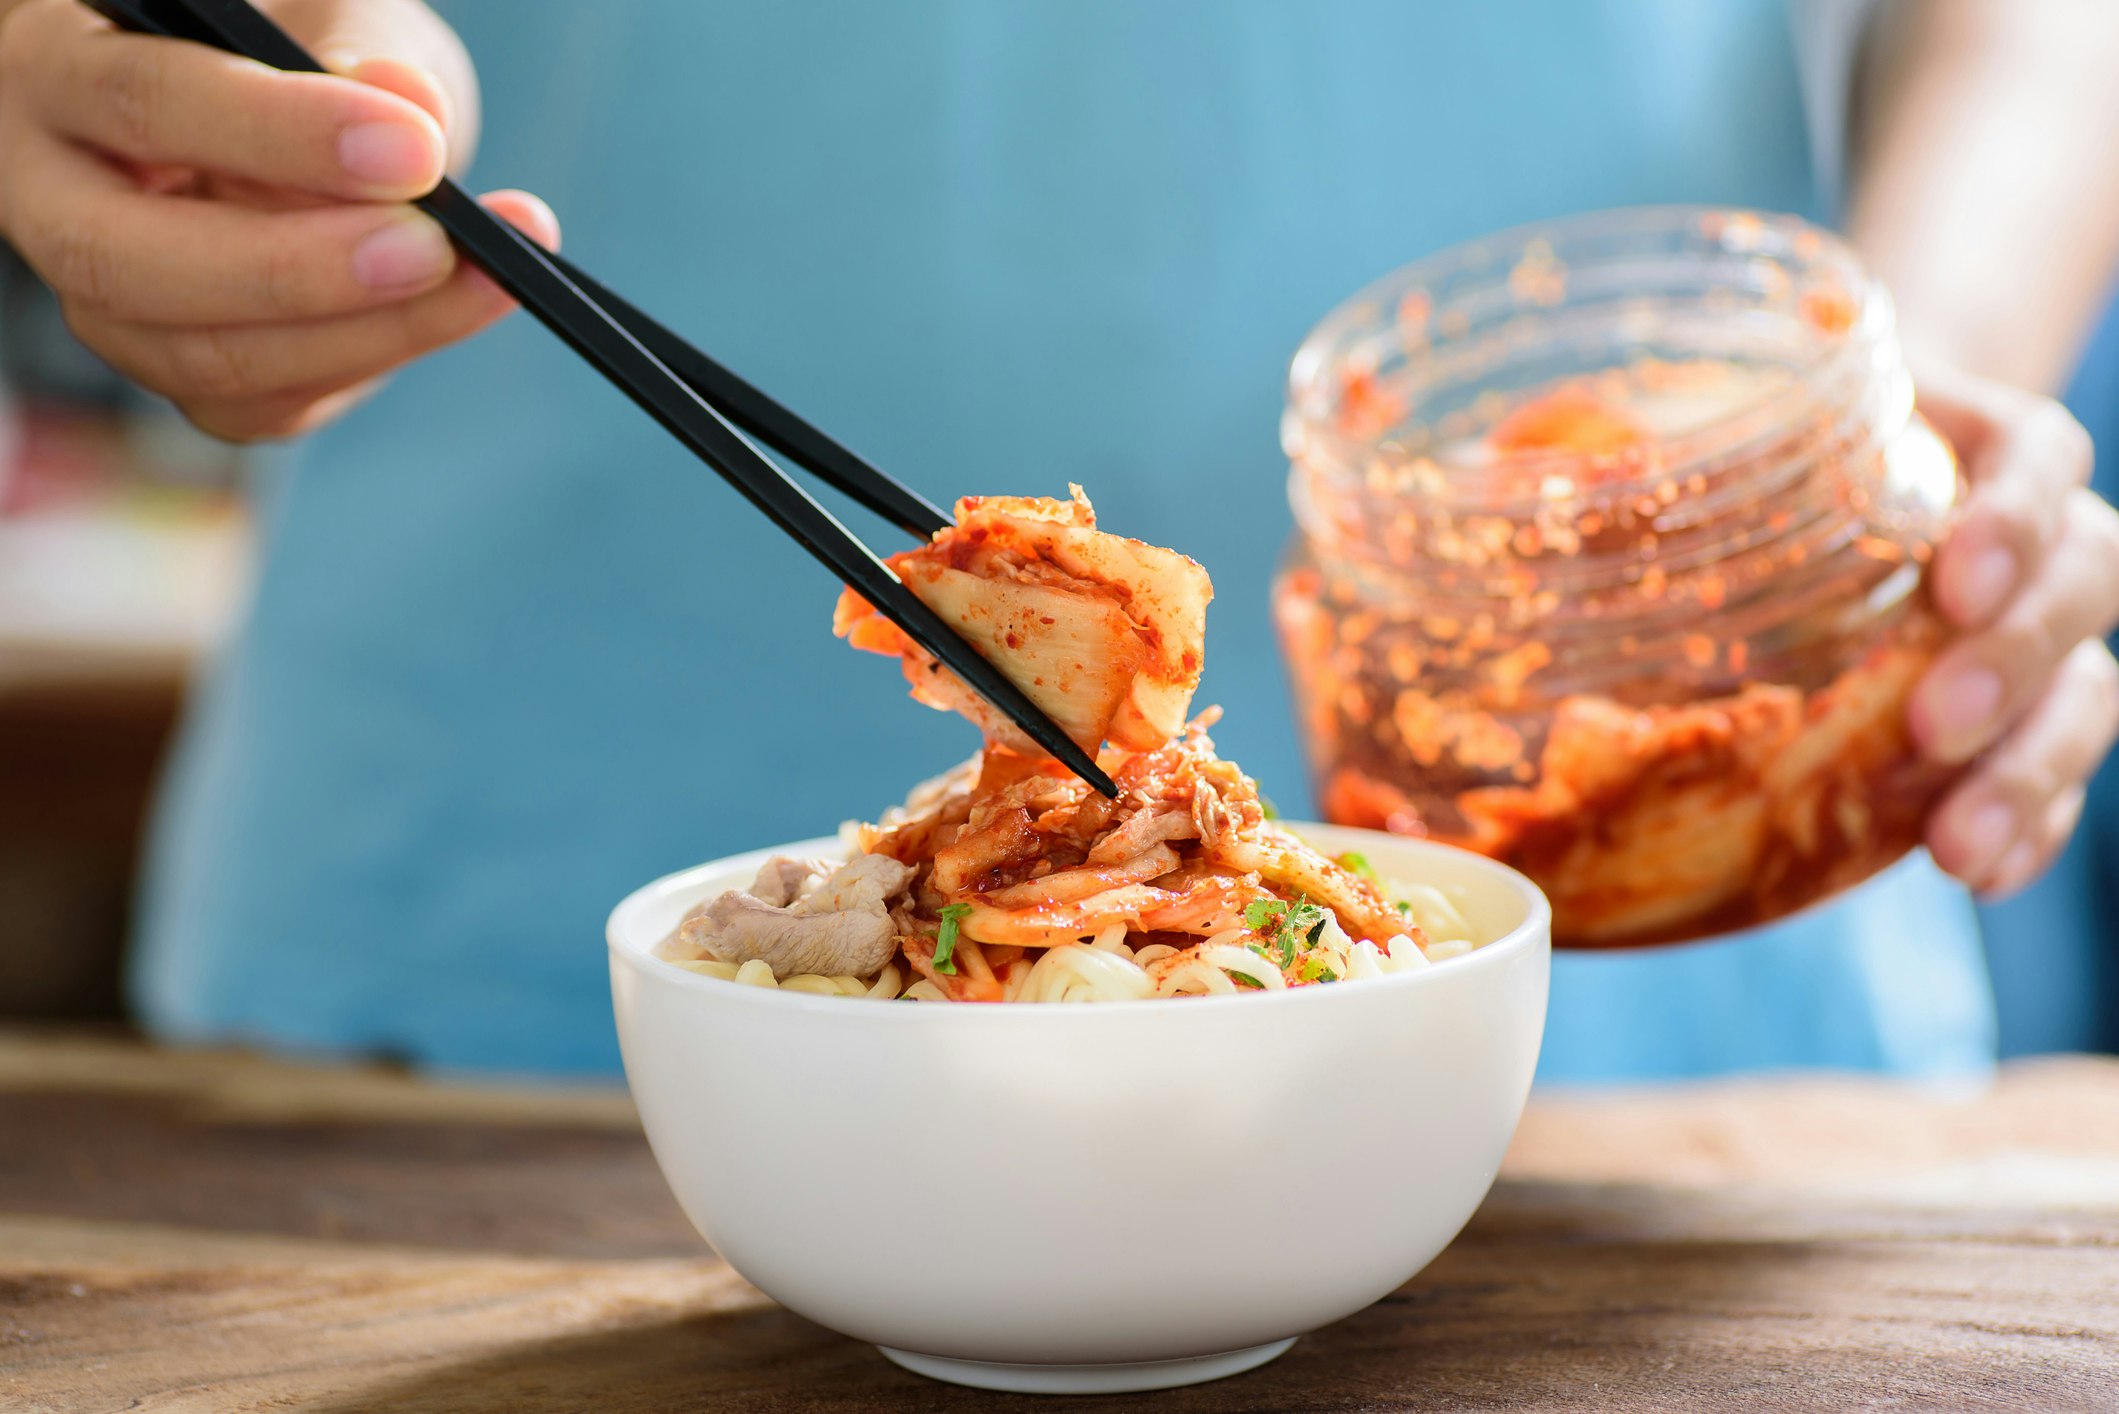 Kimchi served with a bowl of noodles